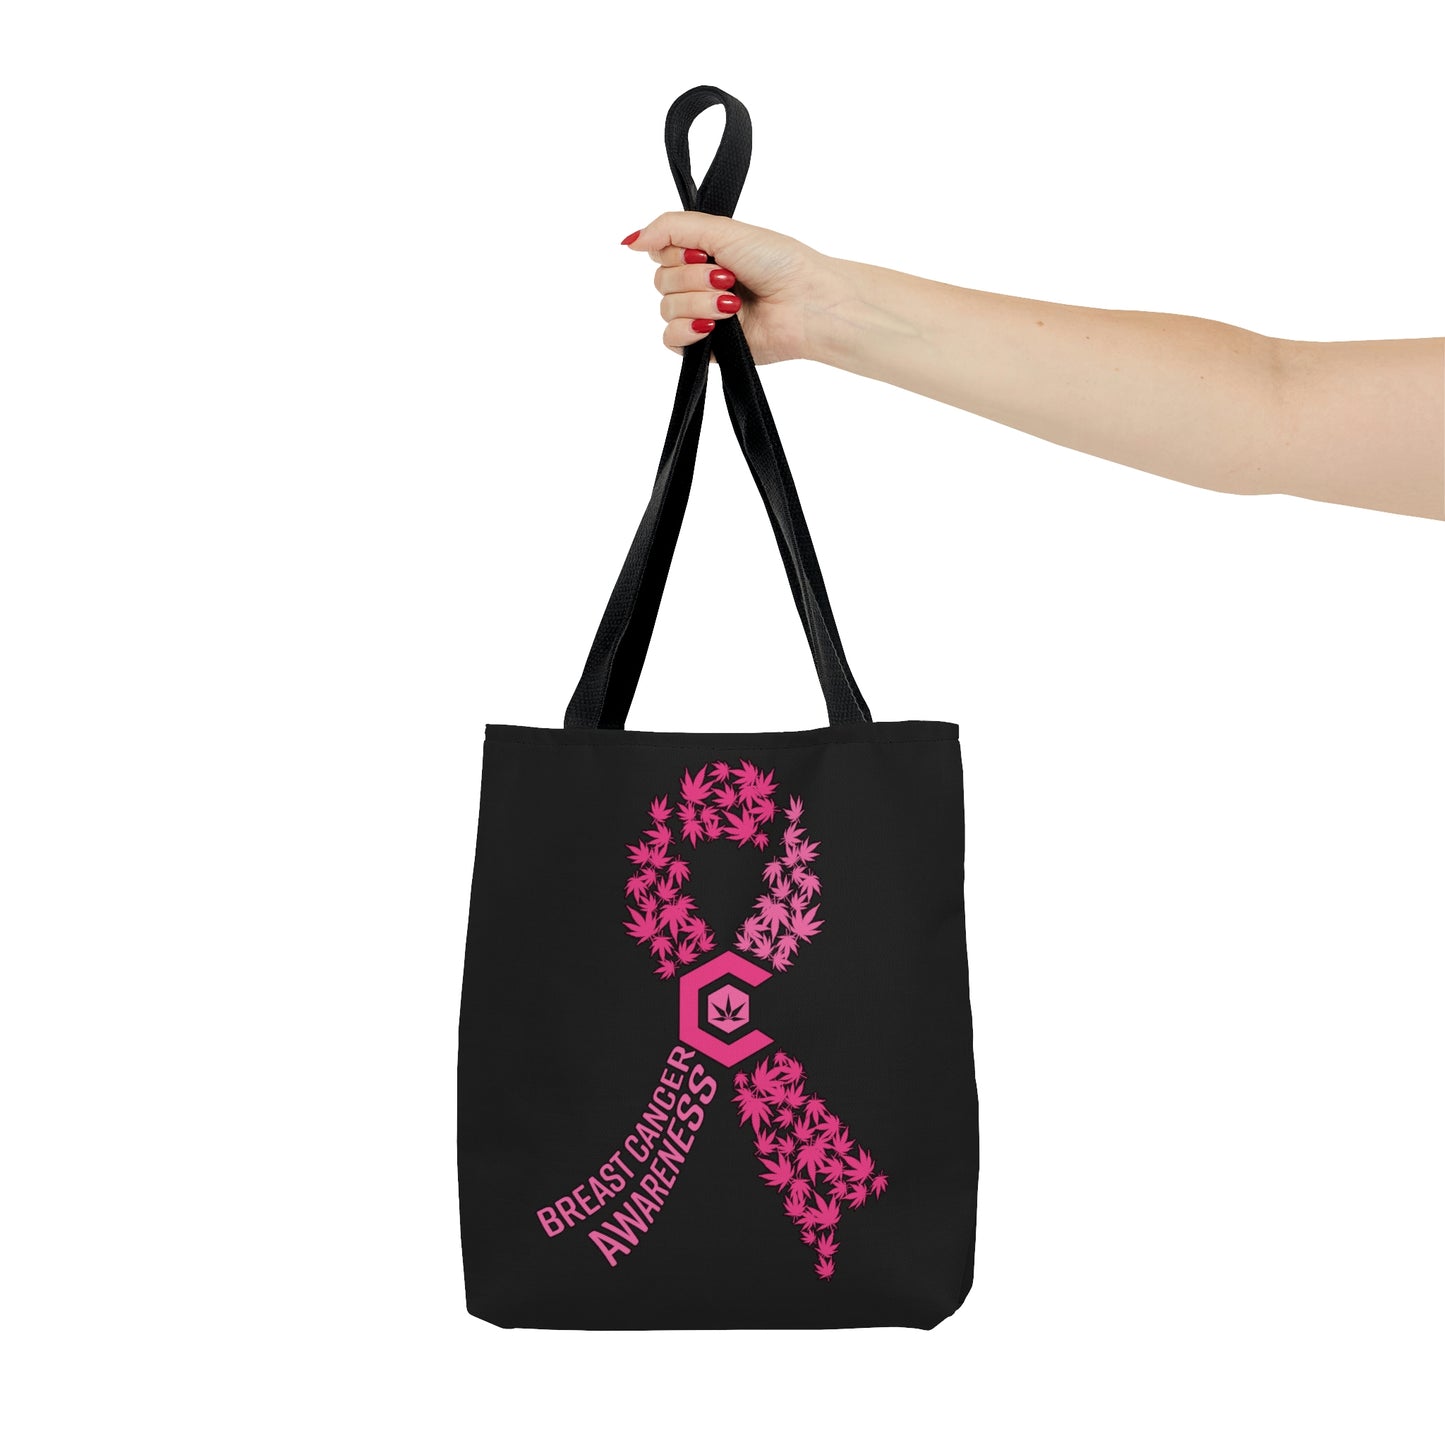 A woman with outstretched hand renders the Breast Cancer Awareness Black Tote Bag with pink weed graphics and words out in front of her